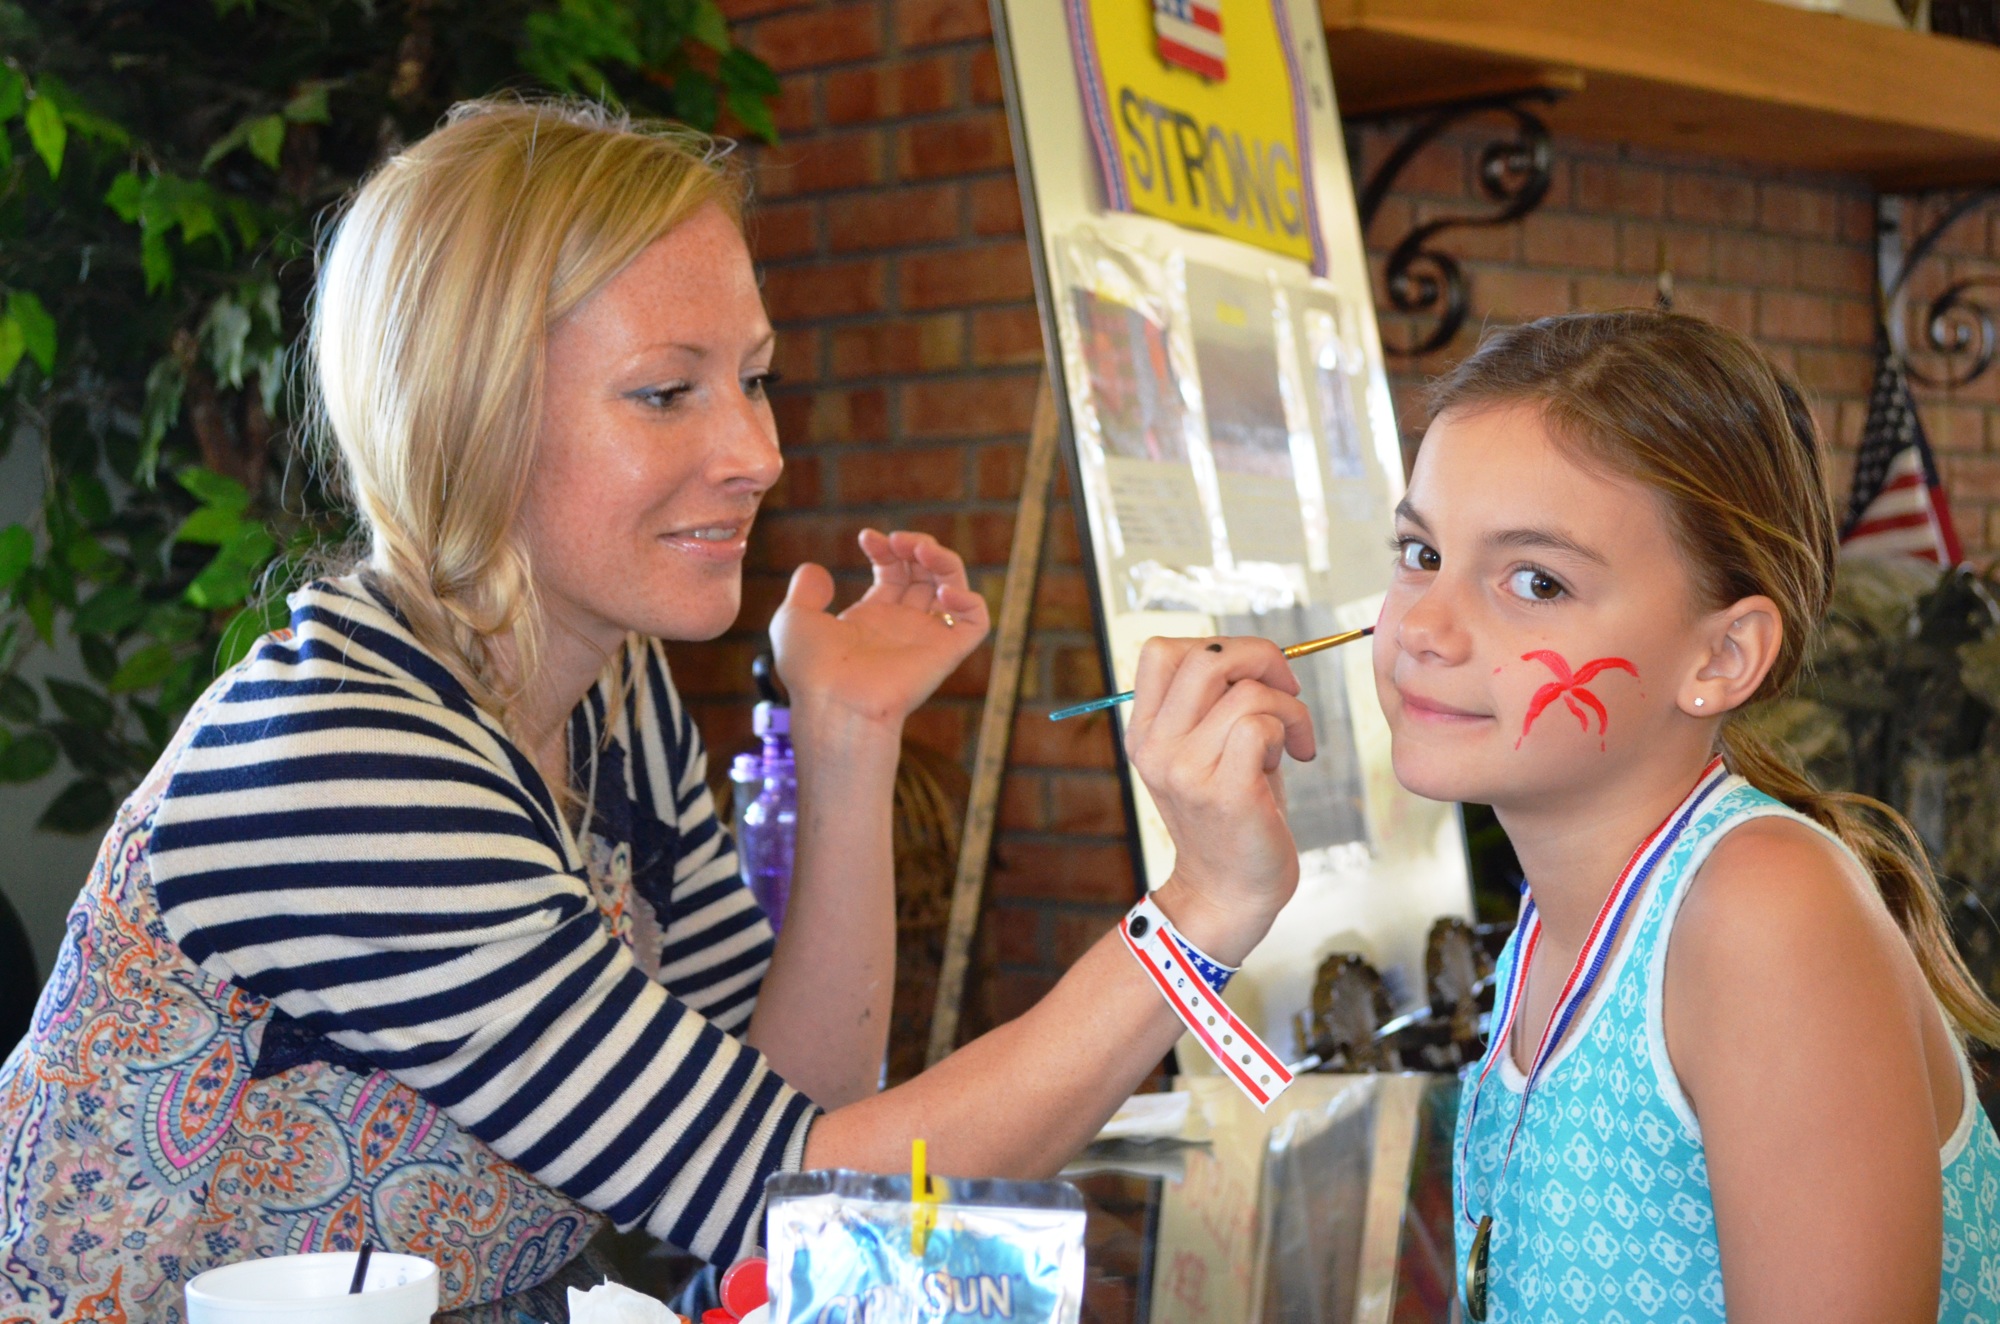 Victoria Maksimyuk has her face painted by Rose Spelman.